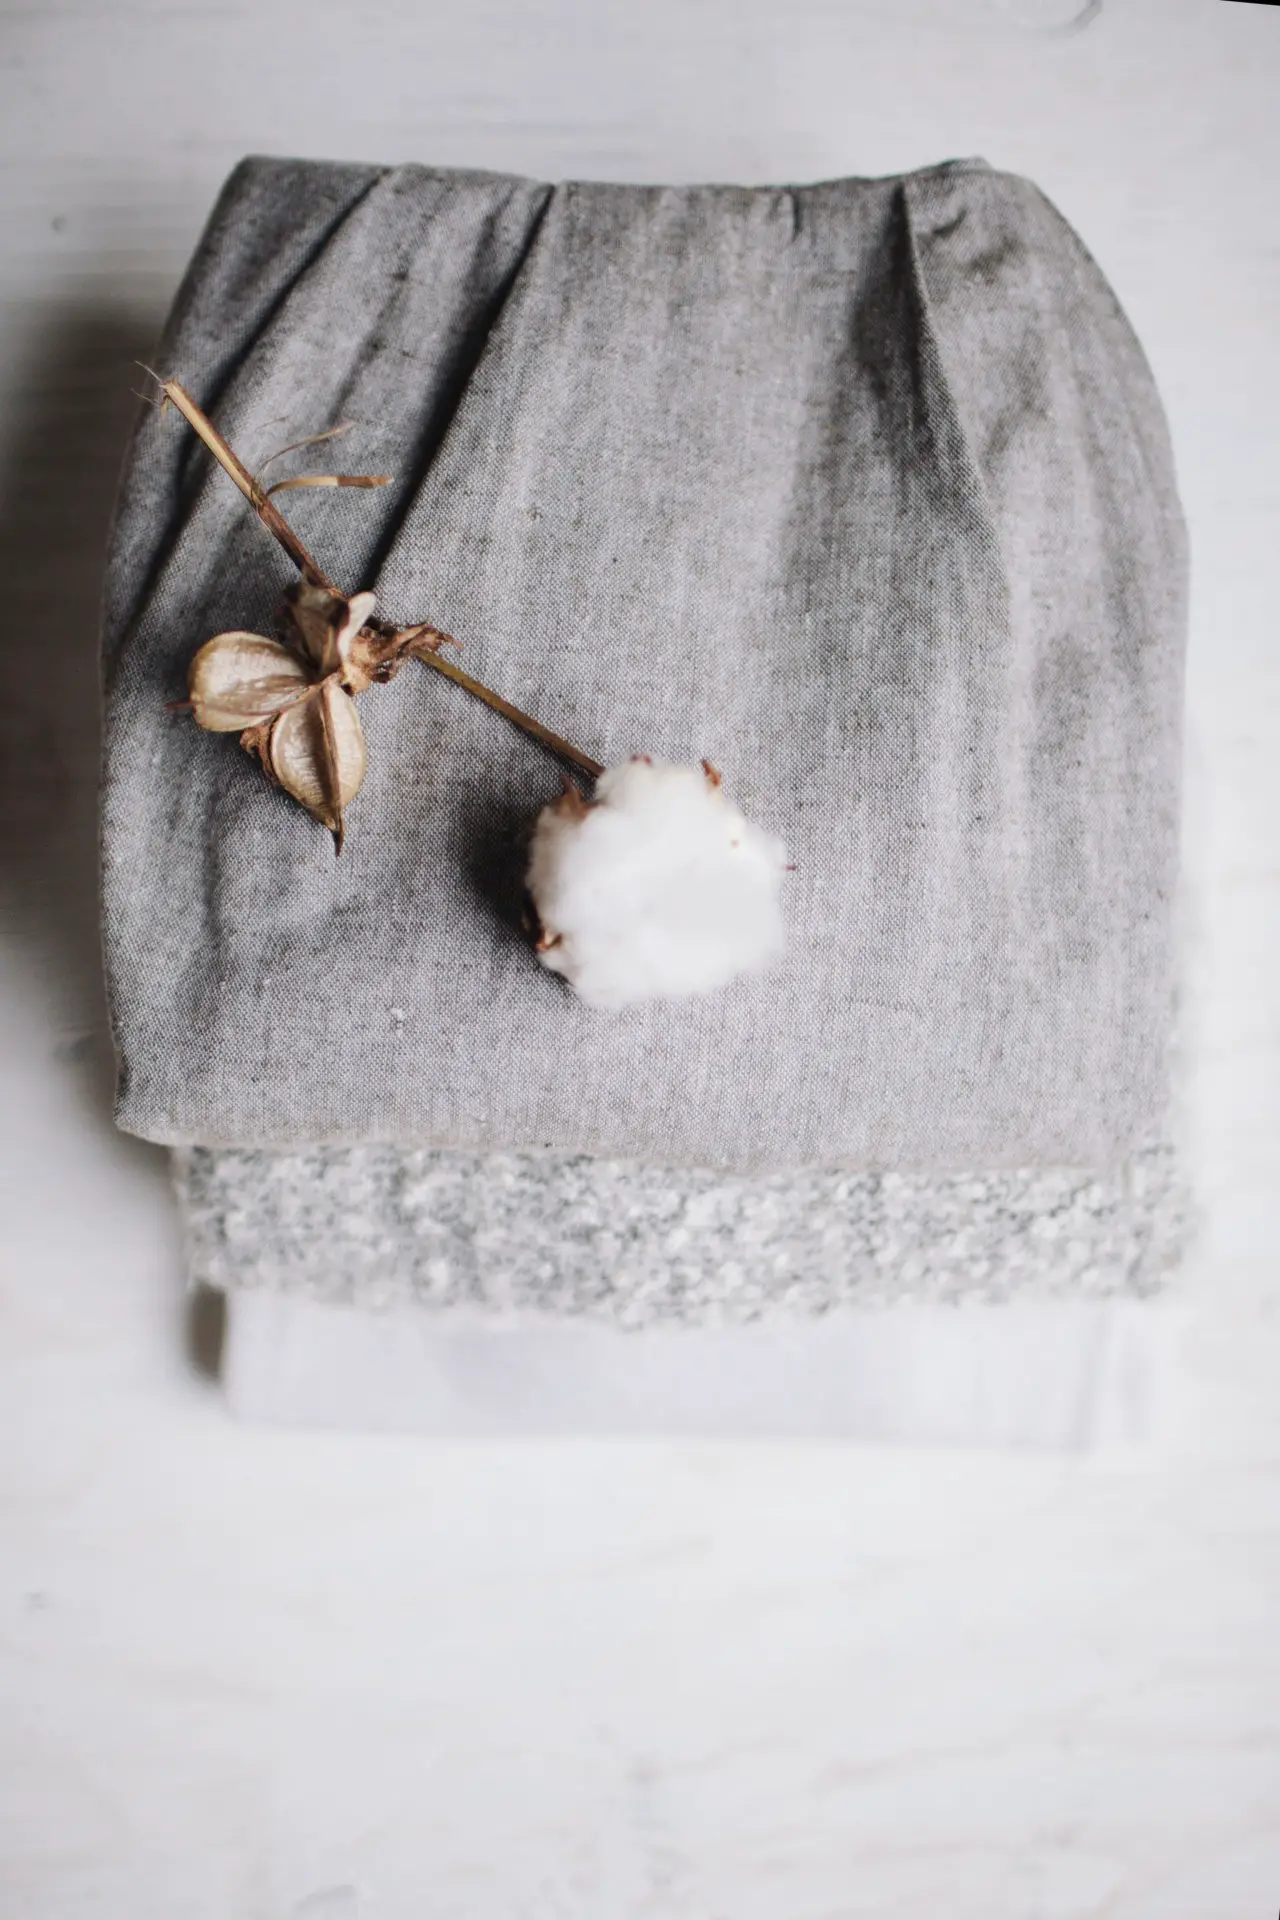 Is Cotton Recyclable? 4 Reasons Why It’s Hard (+Practical Tips)